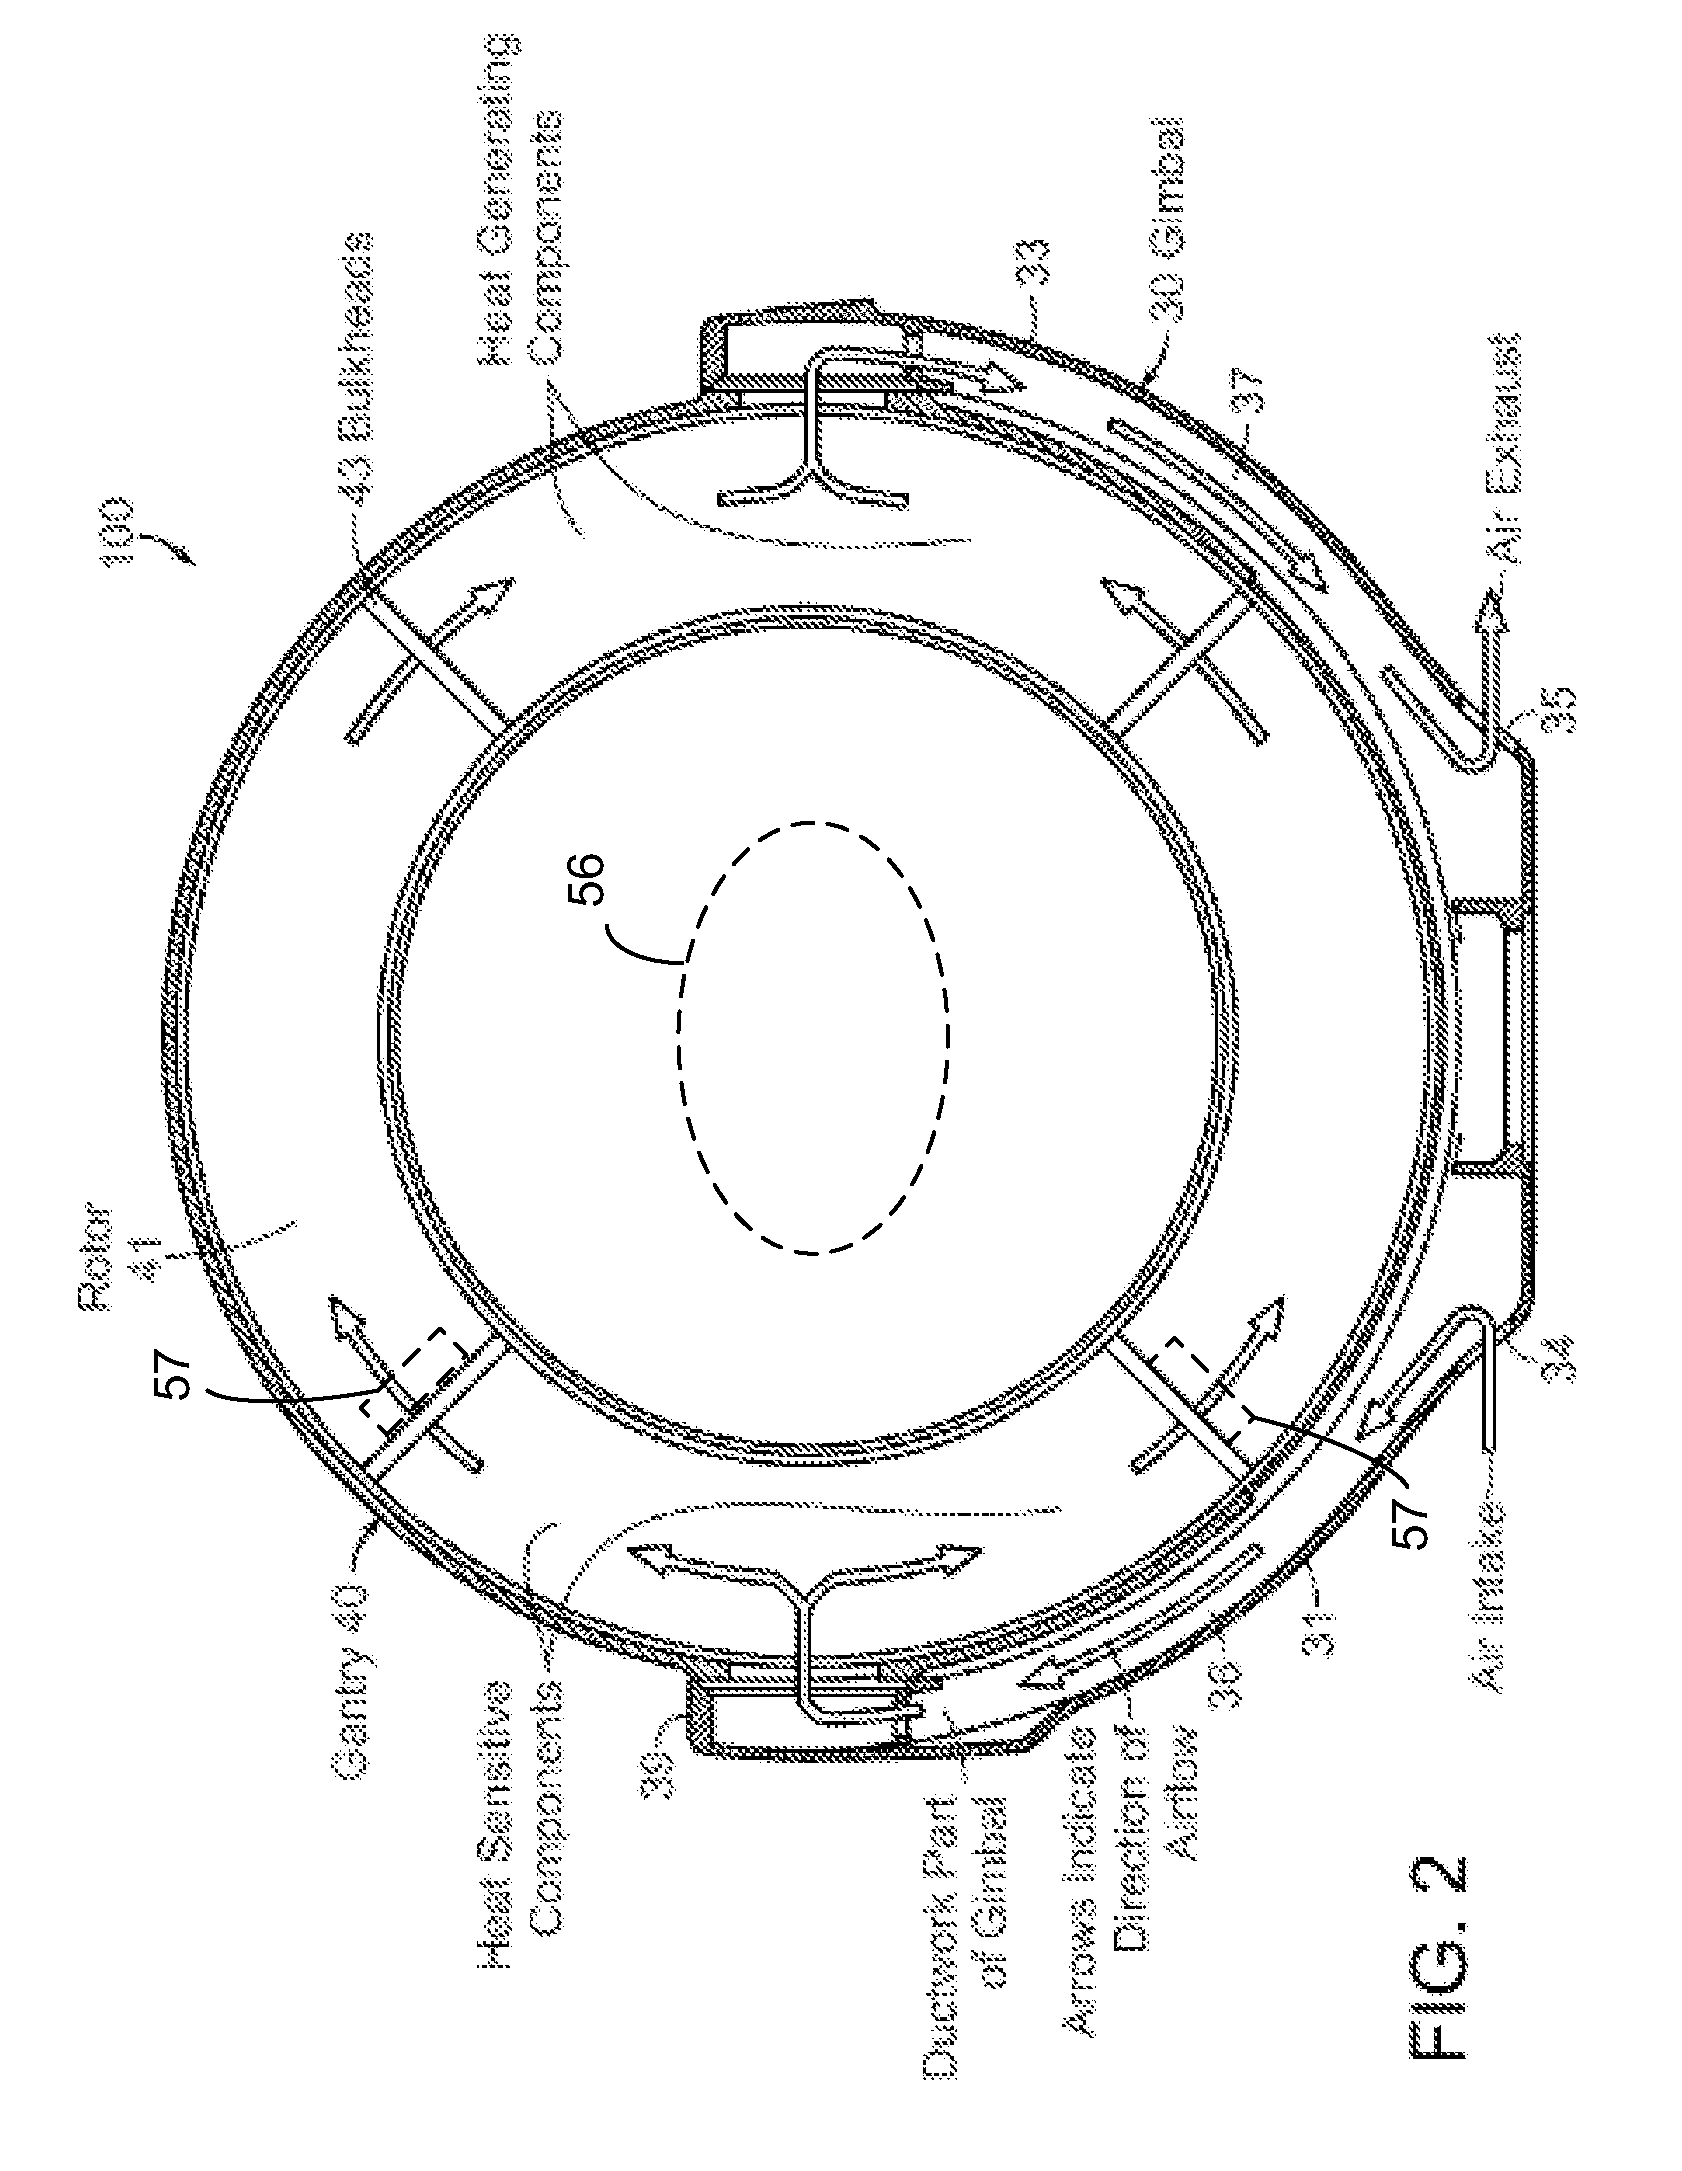 Diagnostic imaging apparatus with airflow cooling system